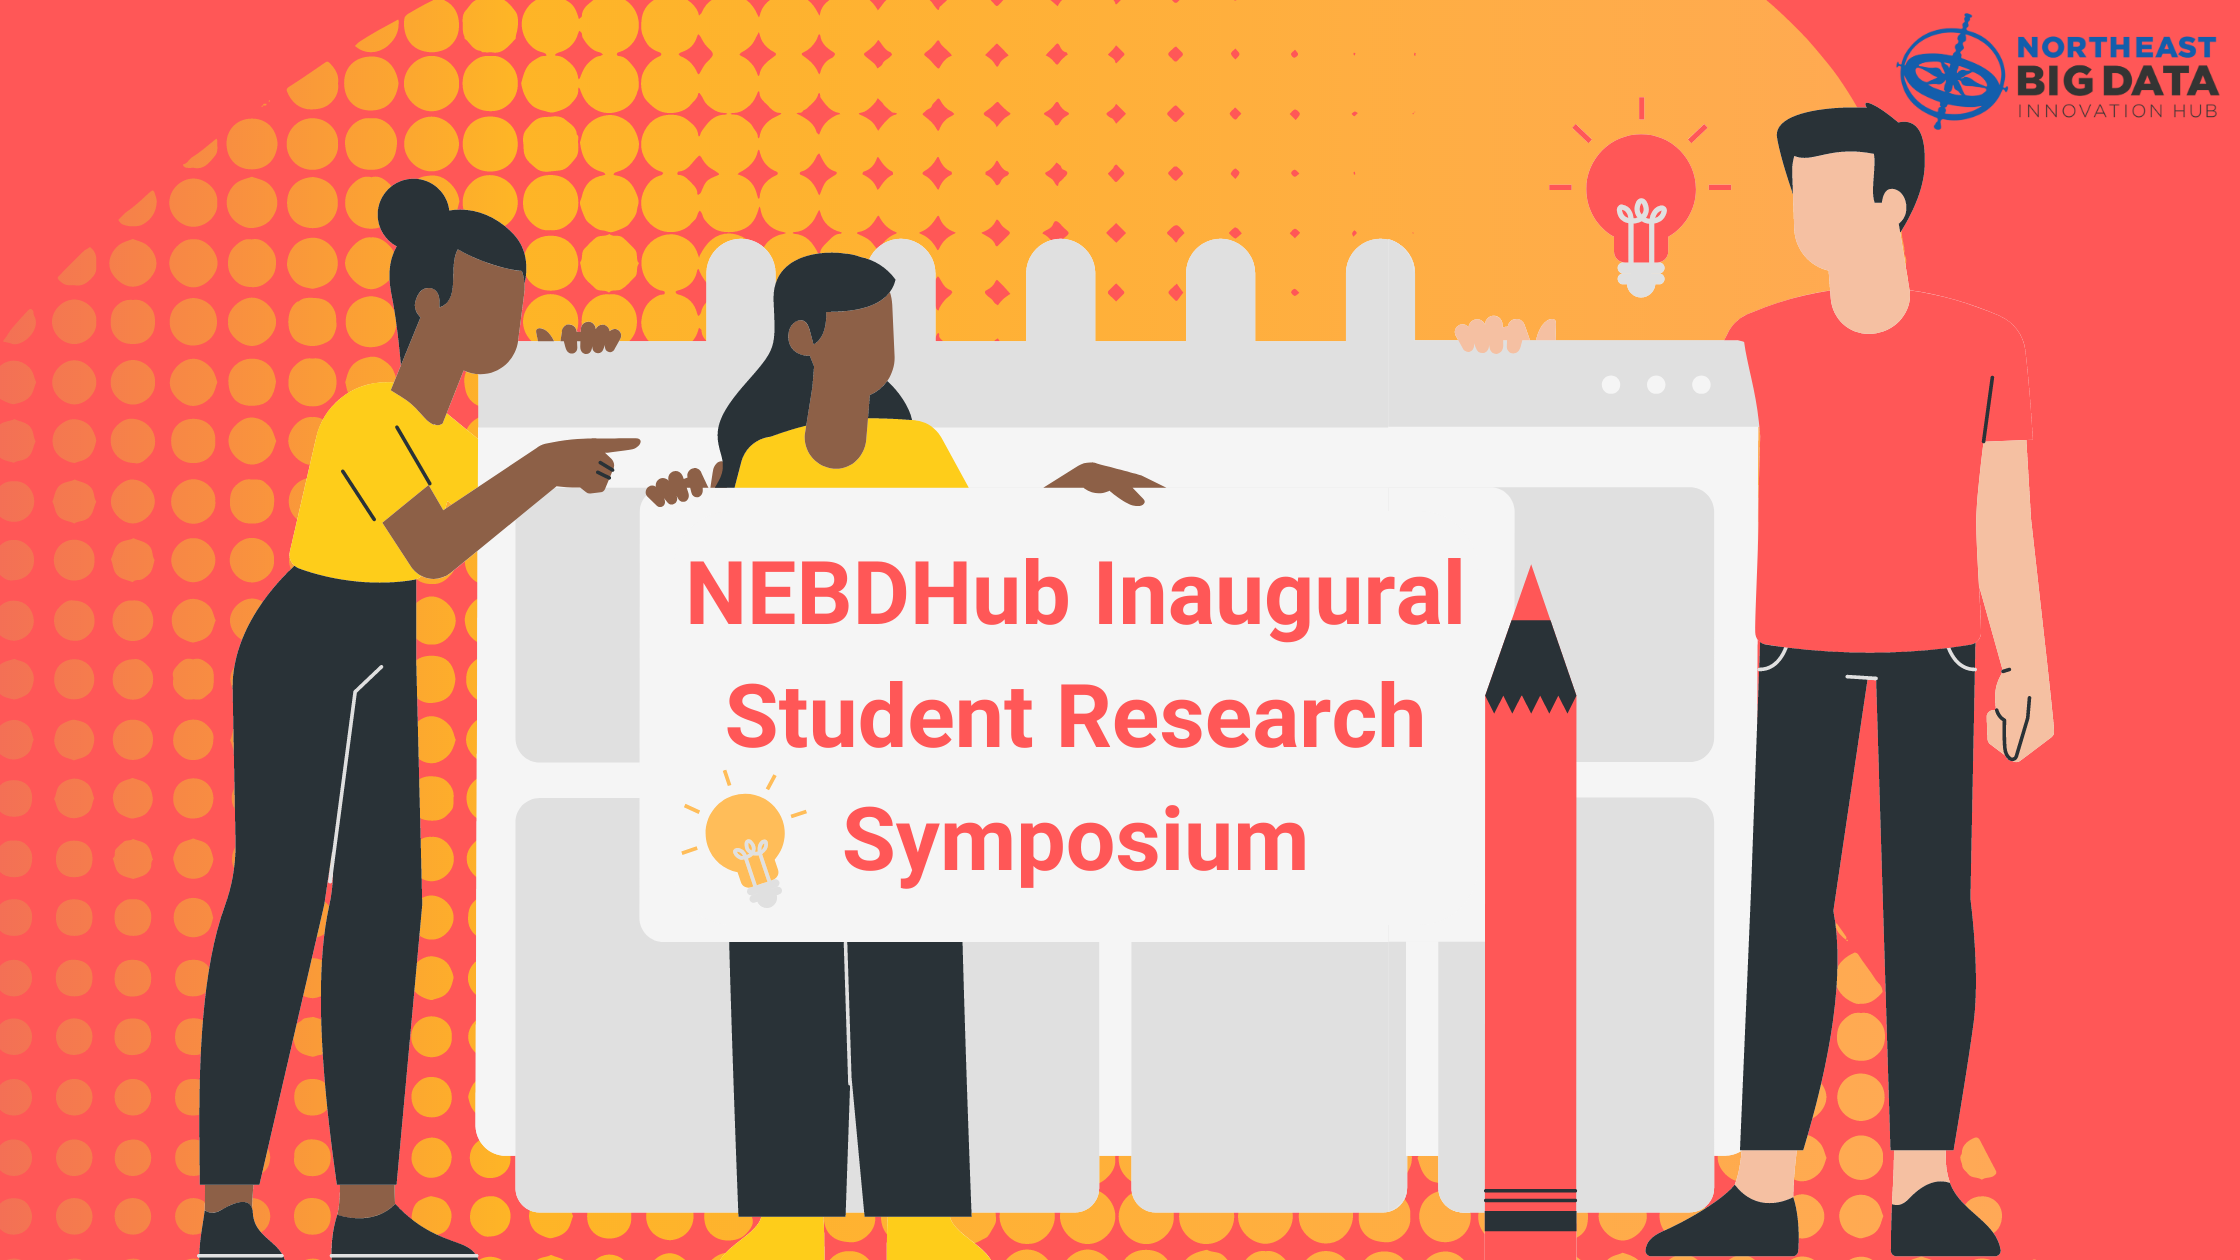 Poster advertising the NEBDHub Inaugural Student Research Symposium